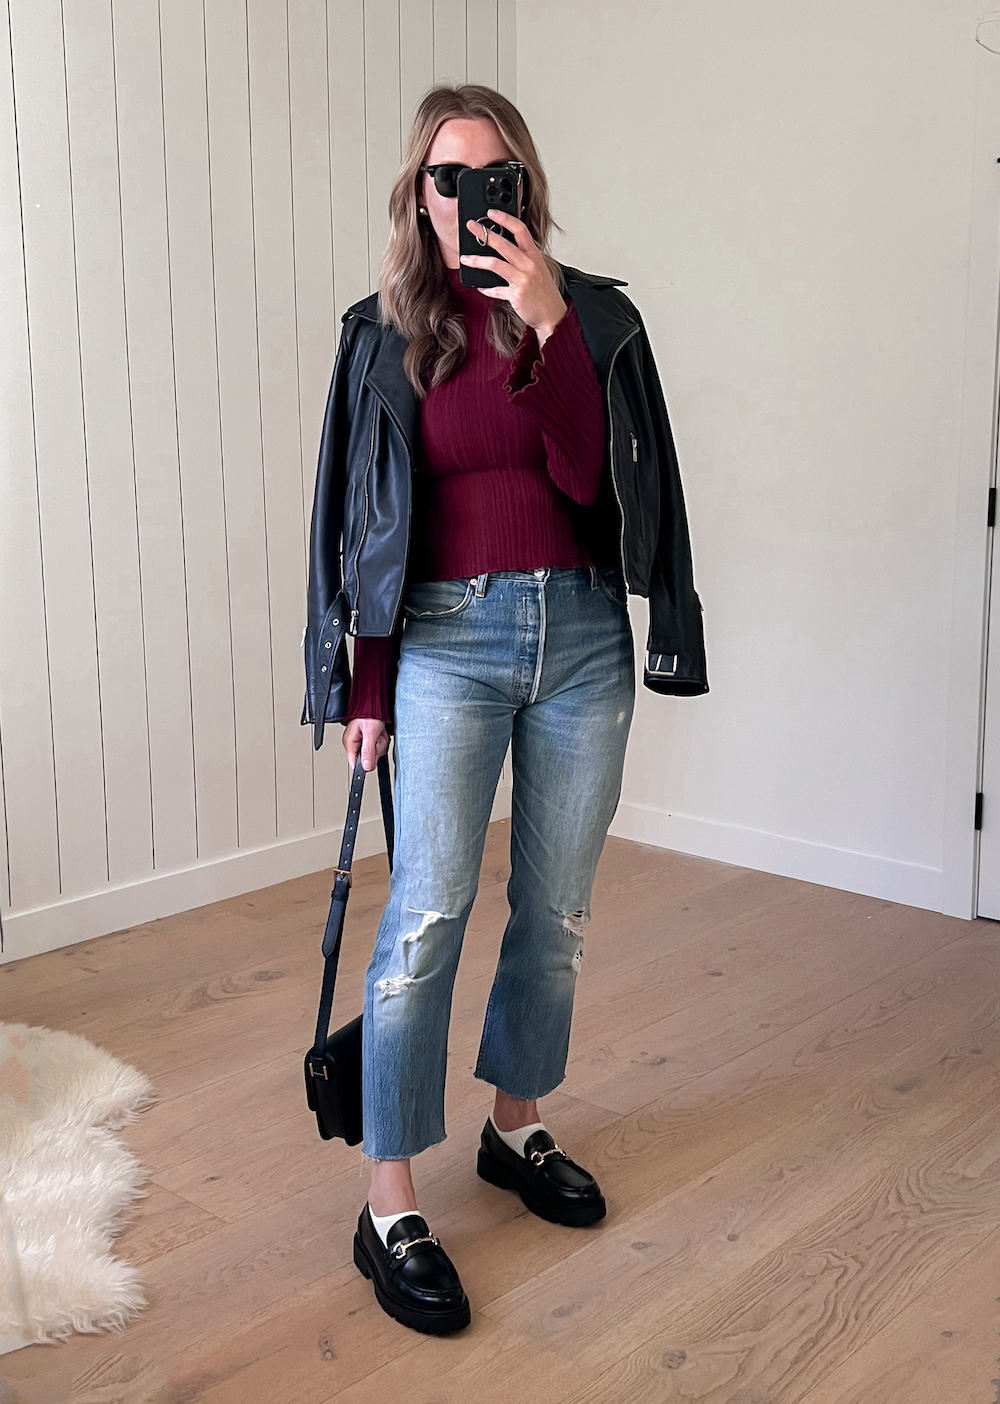 Christal wearing distressed jeans and black loafers with a cranberry sweater under a leather jacket.